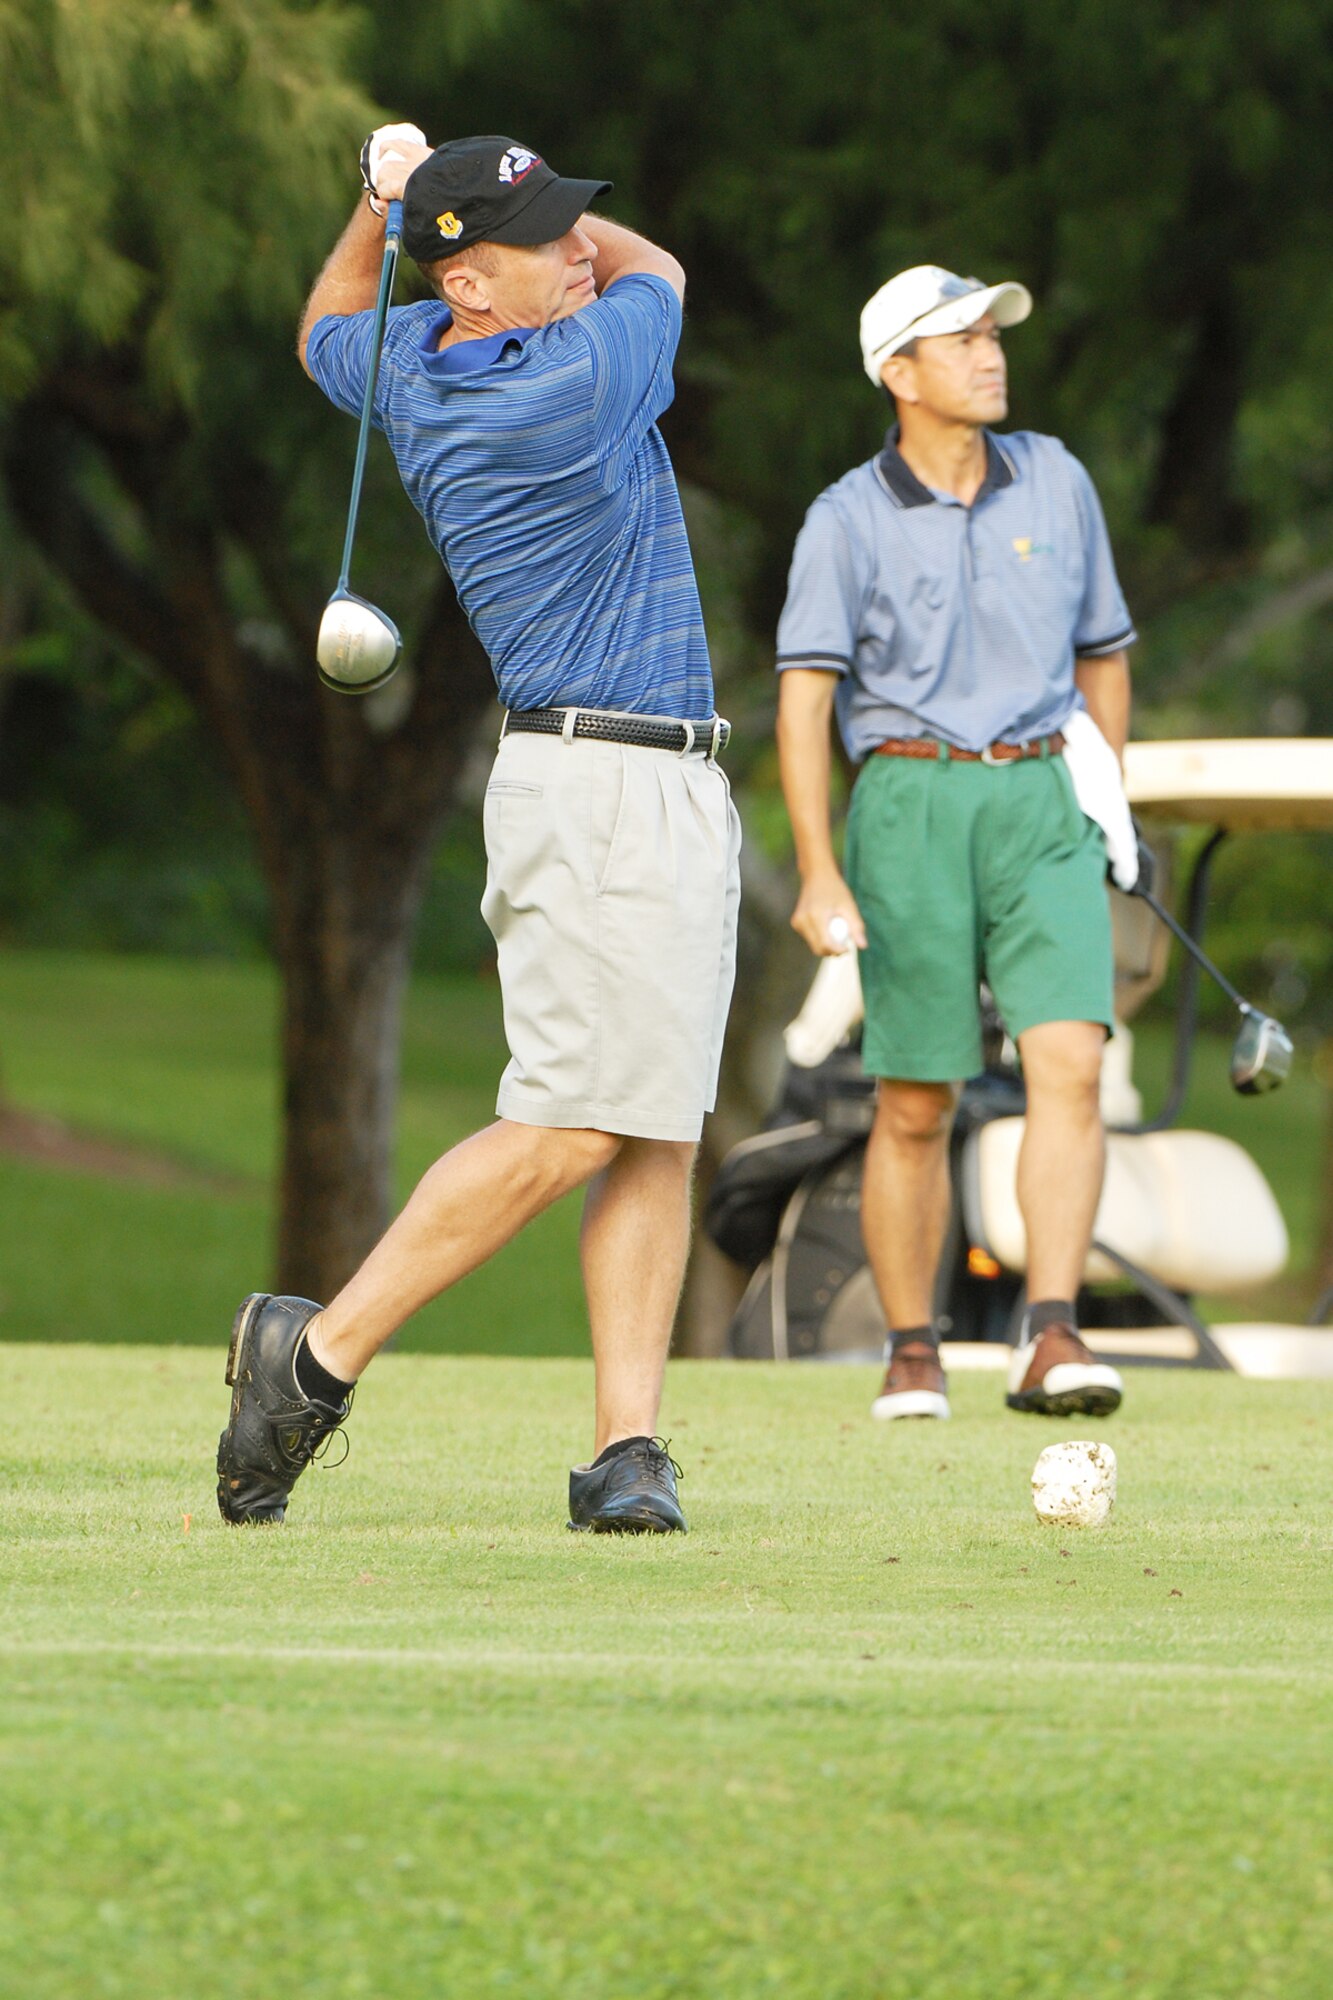 Brig. Gen. Brett T. Williams, 18th Wing commander, tees off during the Friendship Golf Tournament at Kadena Air Base, Japan Sept. 23, 2008. The annual tournament allows U.S. and Japanese military and community leaders to gather for a day of golf and camaraderie. (U.S. Air Force photo/Airman 1st Class Chad Warren)